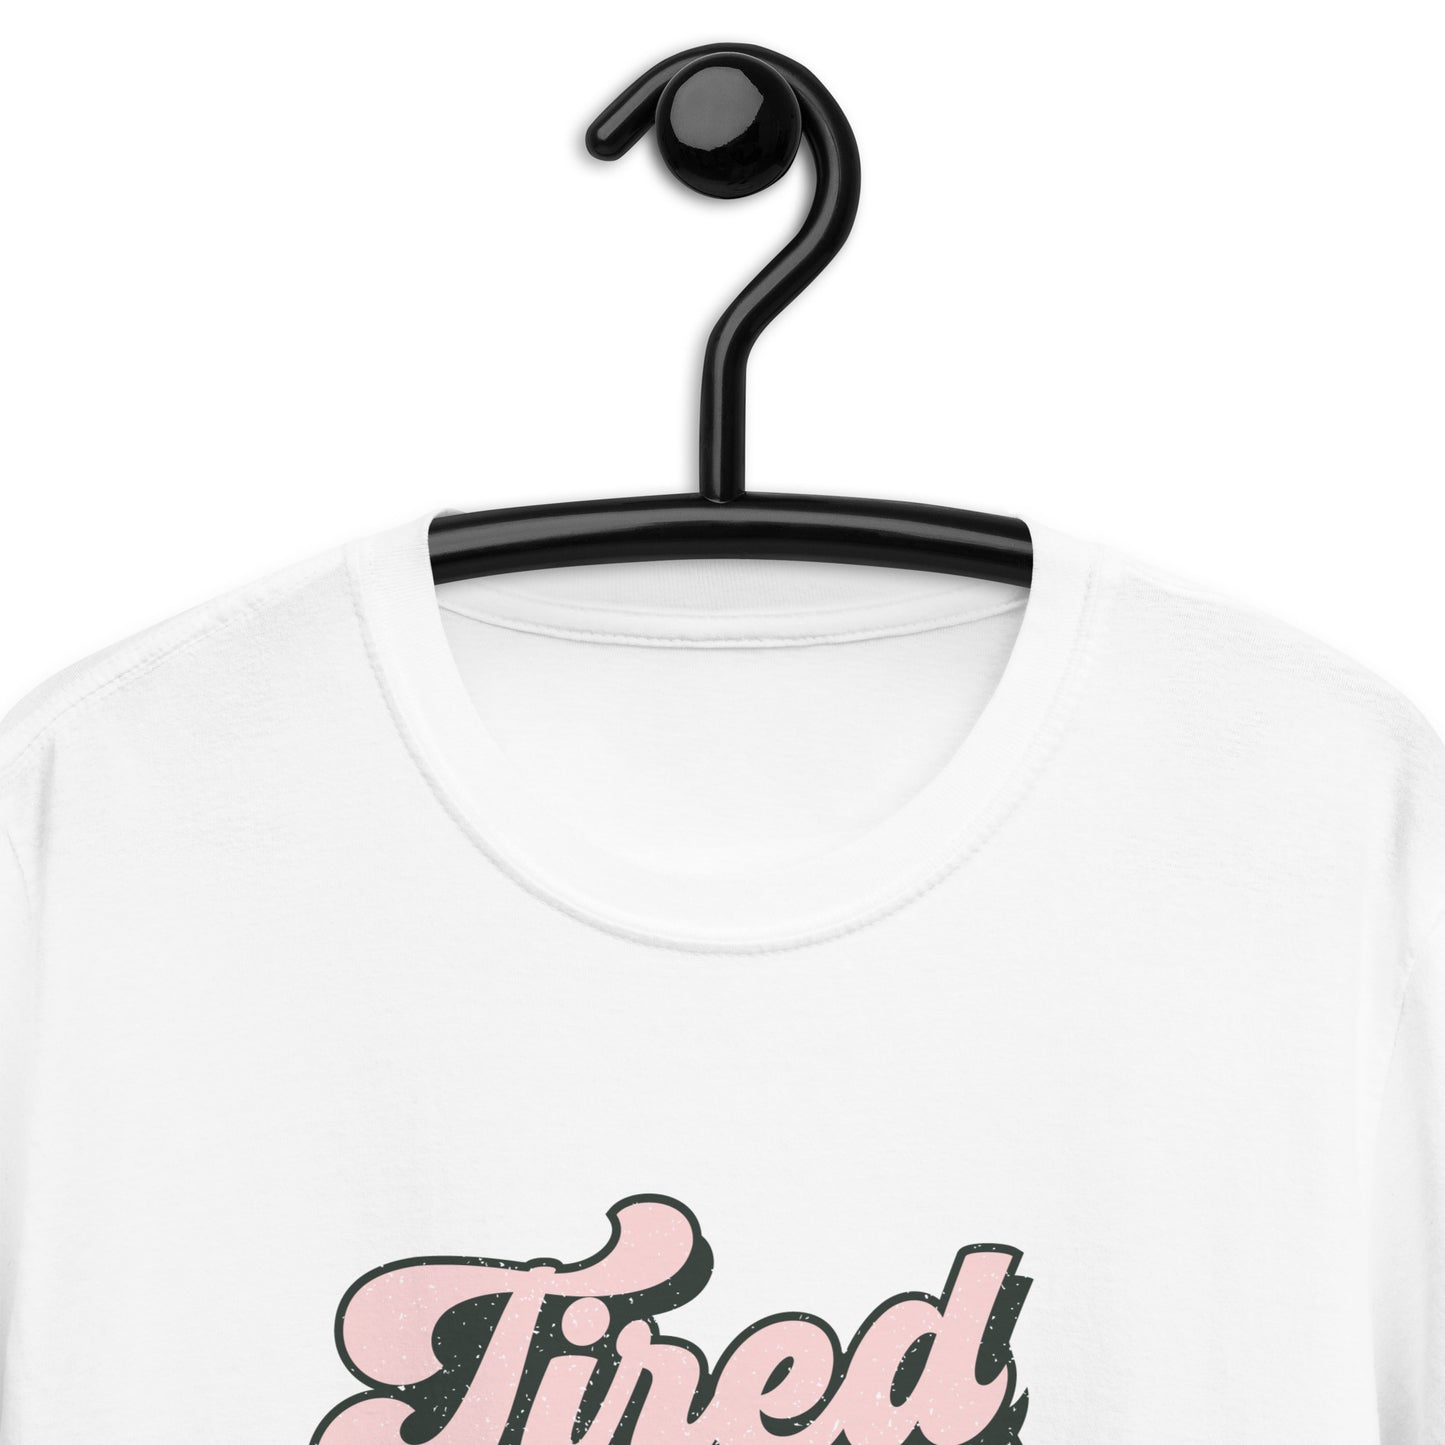 Tired as a Mother T-Shirt